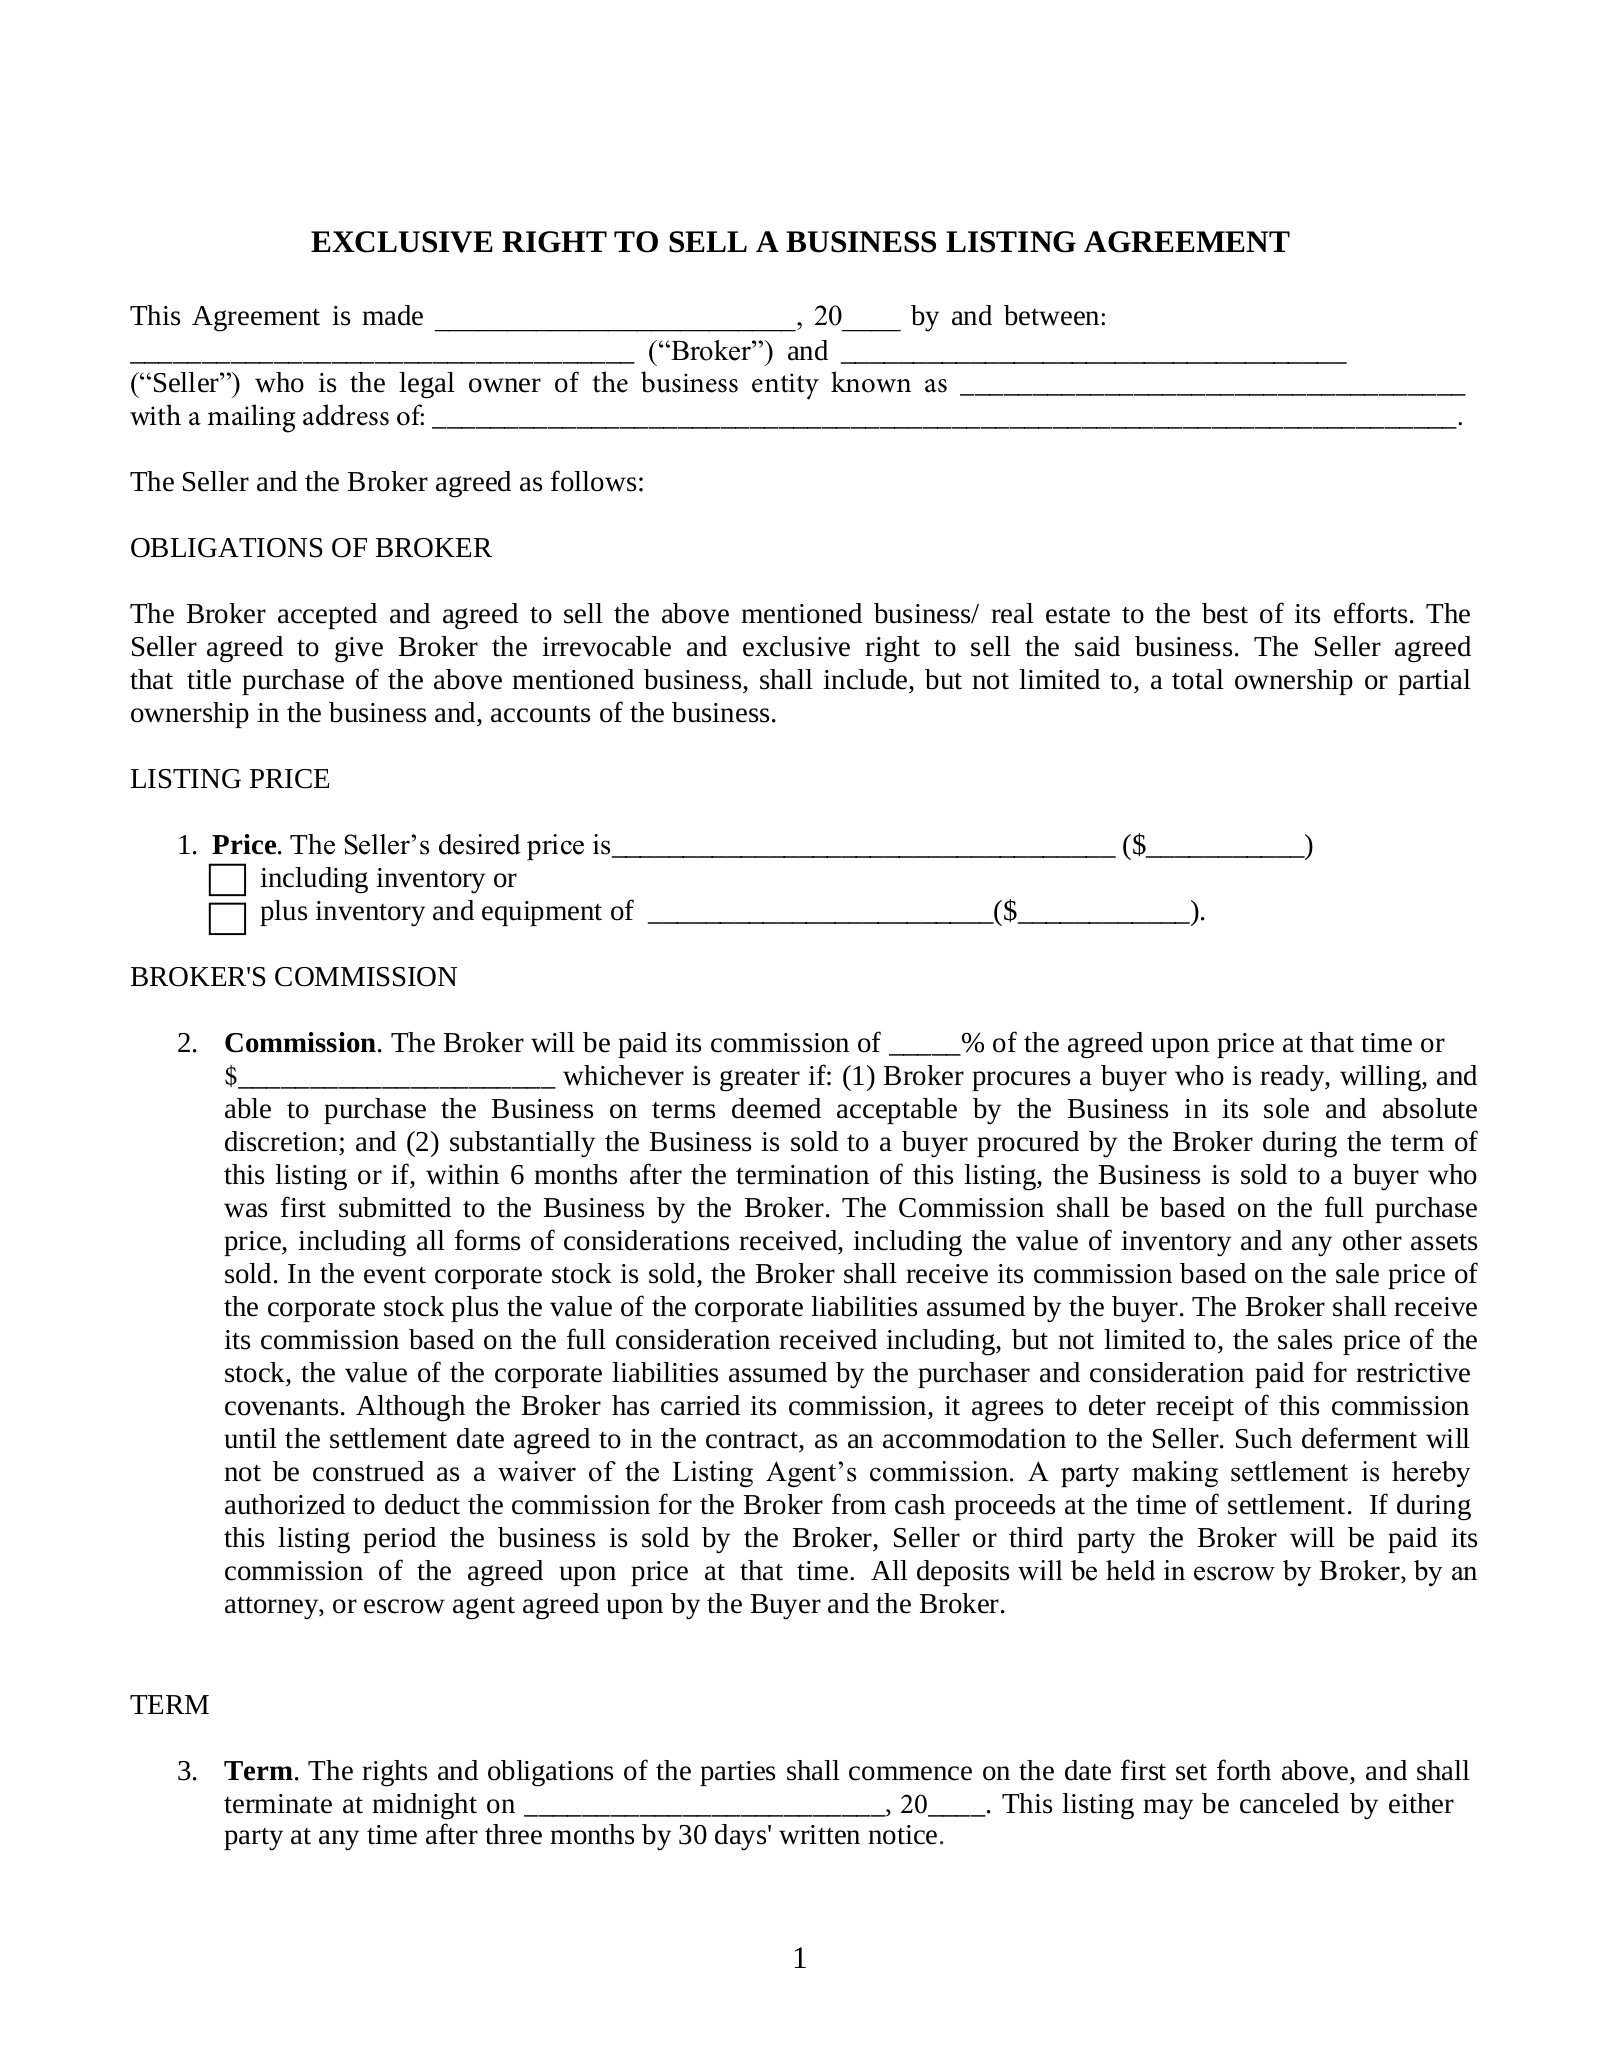 Business Listing Agreement Template